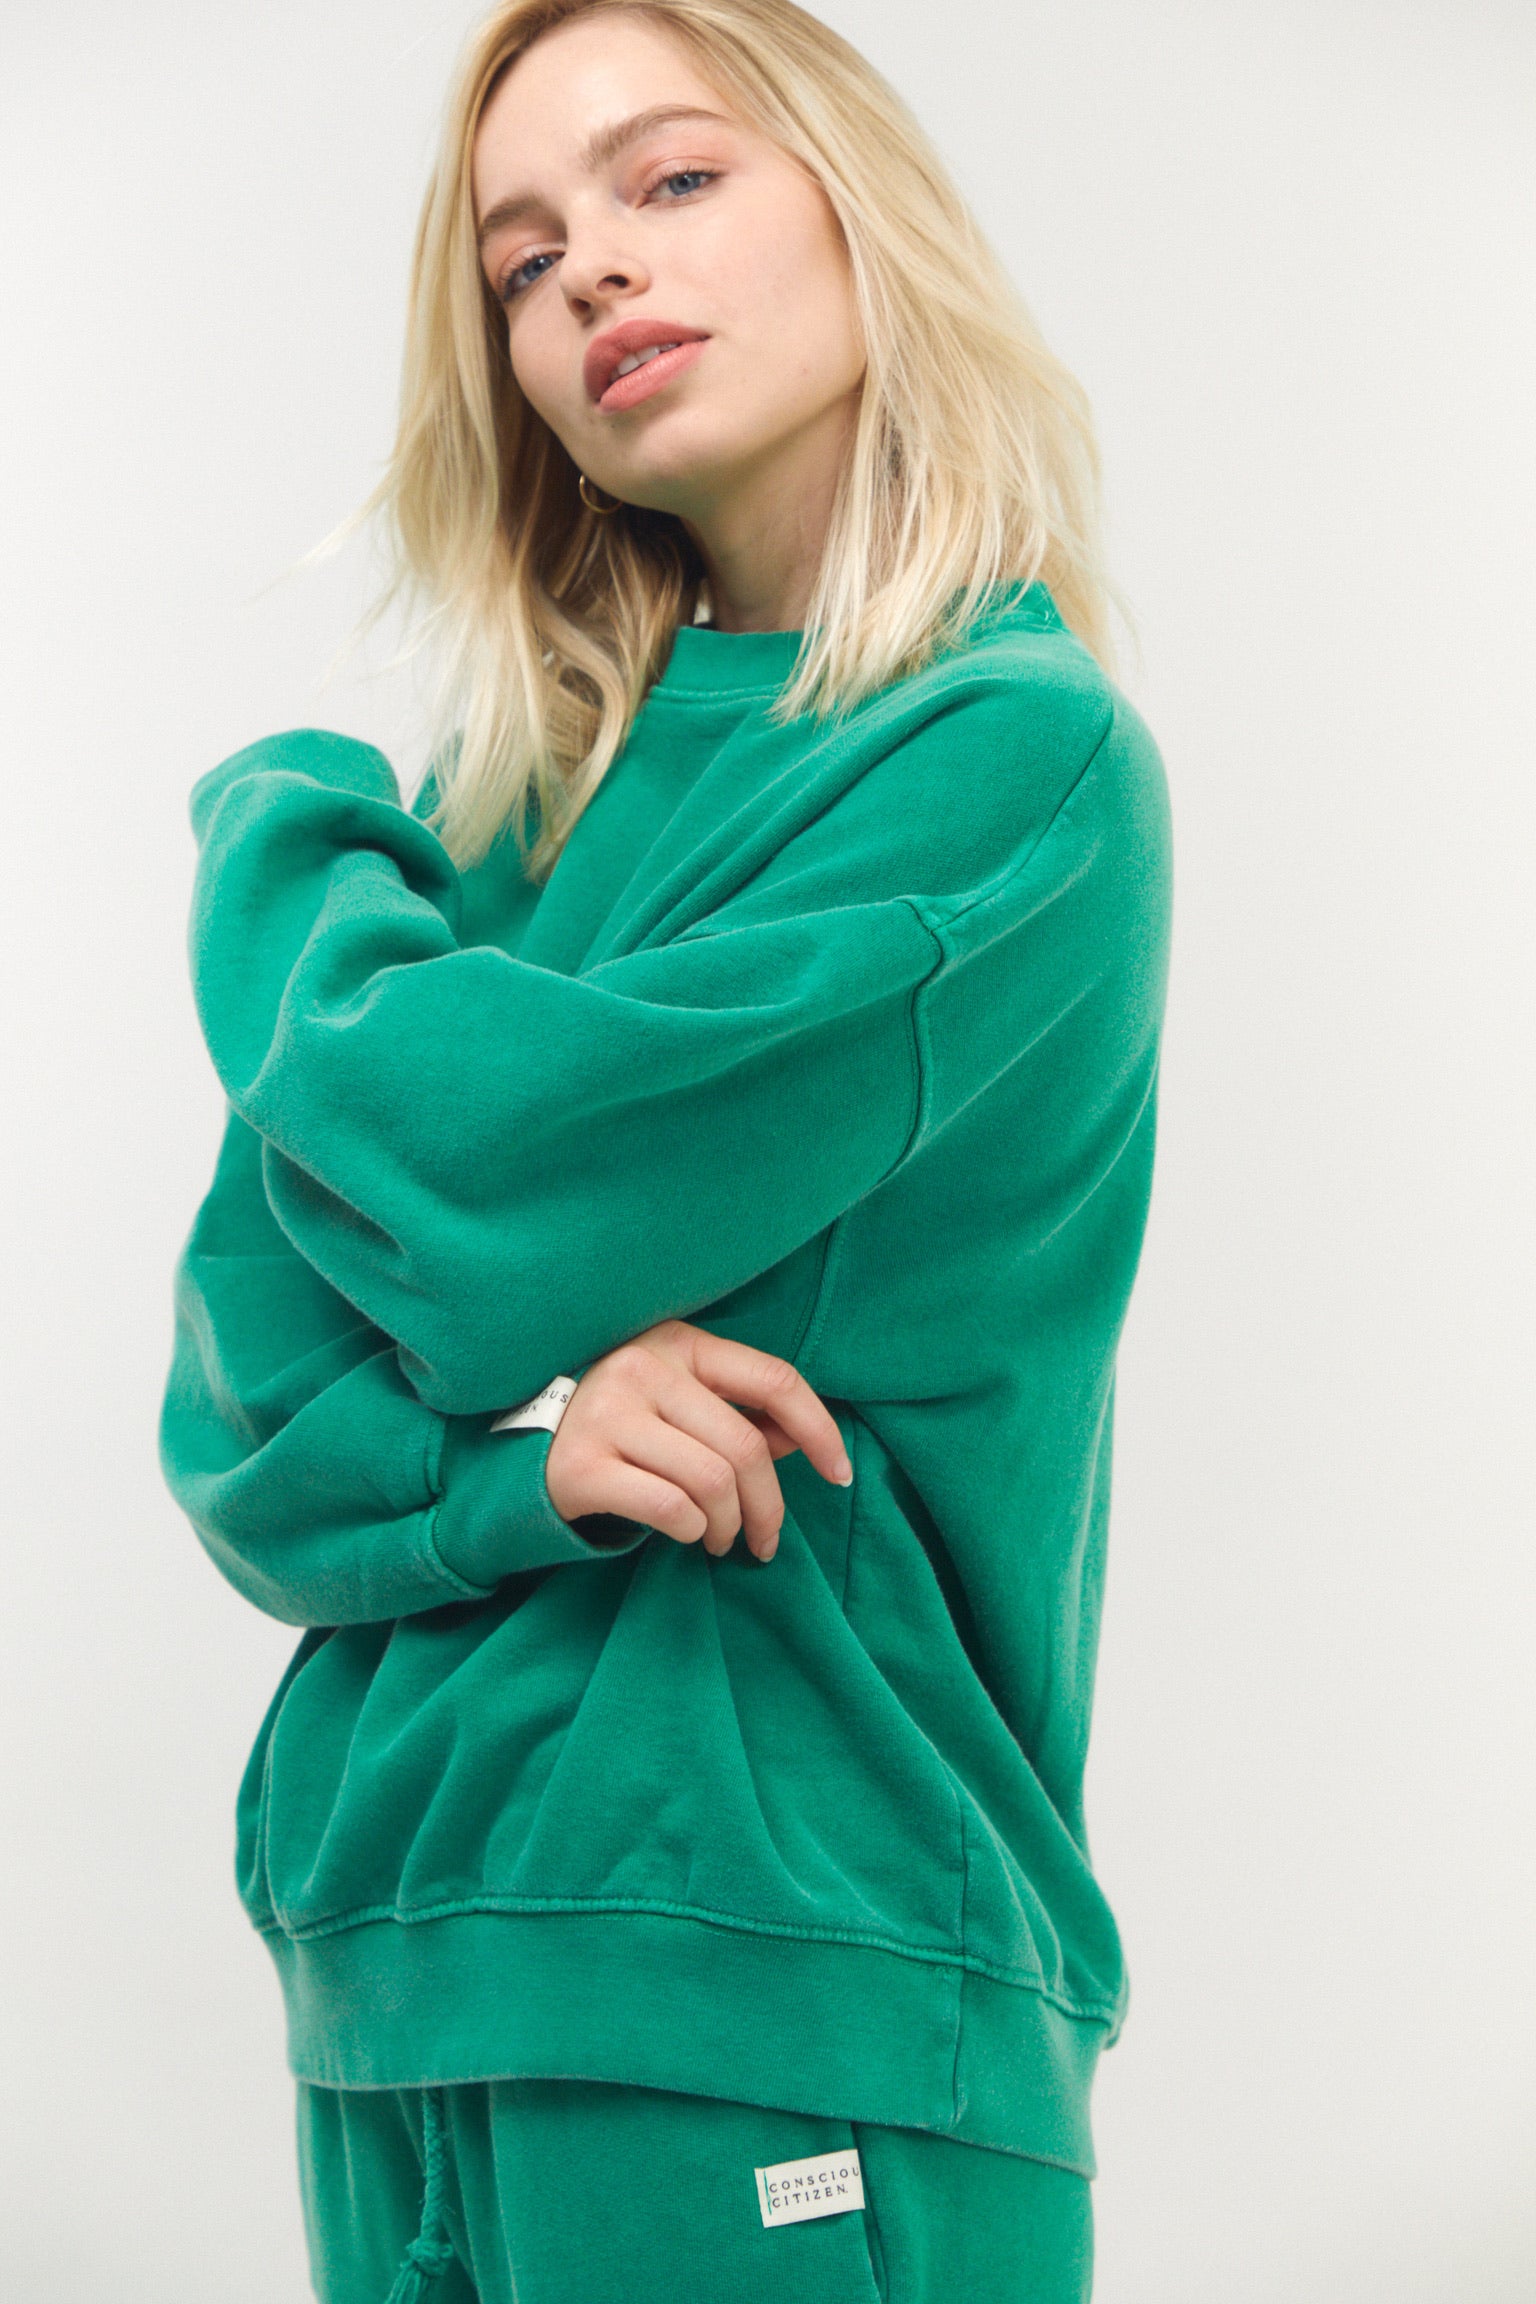  Elevate your loungewear with a sustainable sweatshirt made from sustainable materials